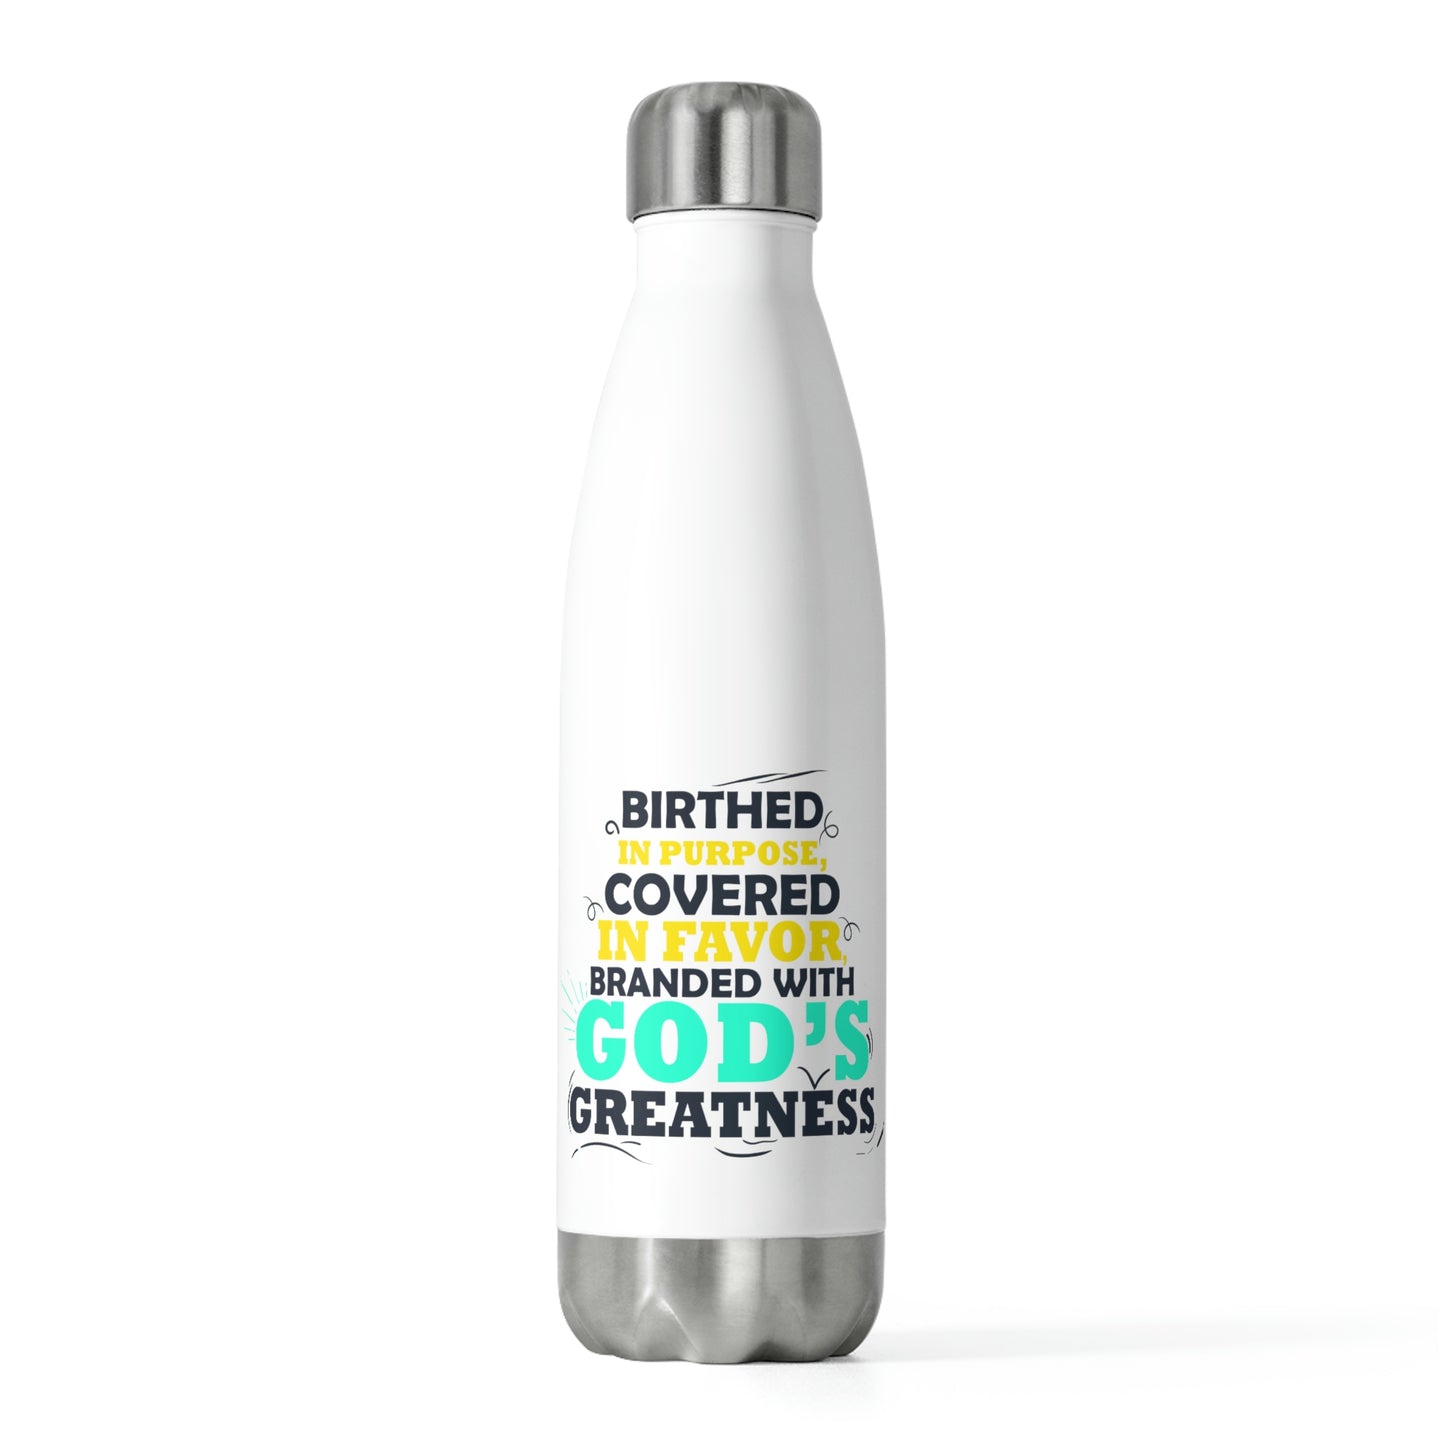 Birthed In Purpose, Covered In Favor, Branded With God's Greatness Insulated Bottle